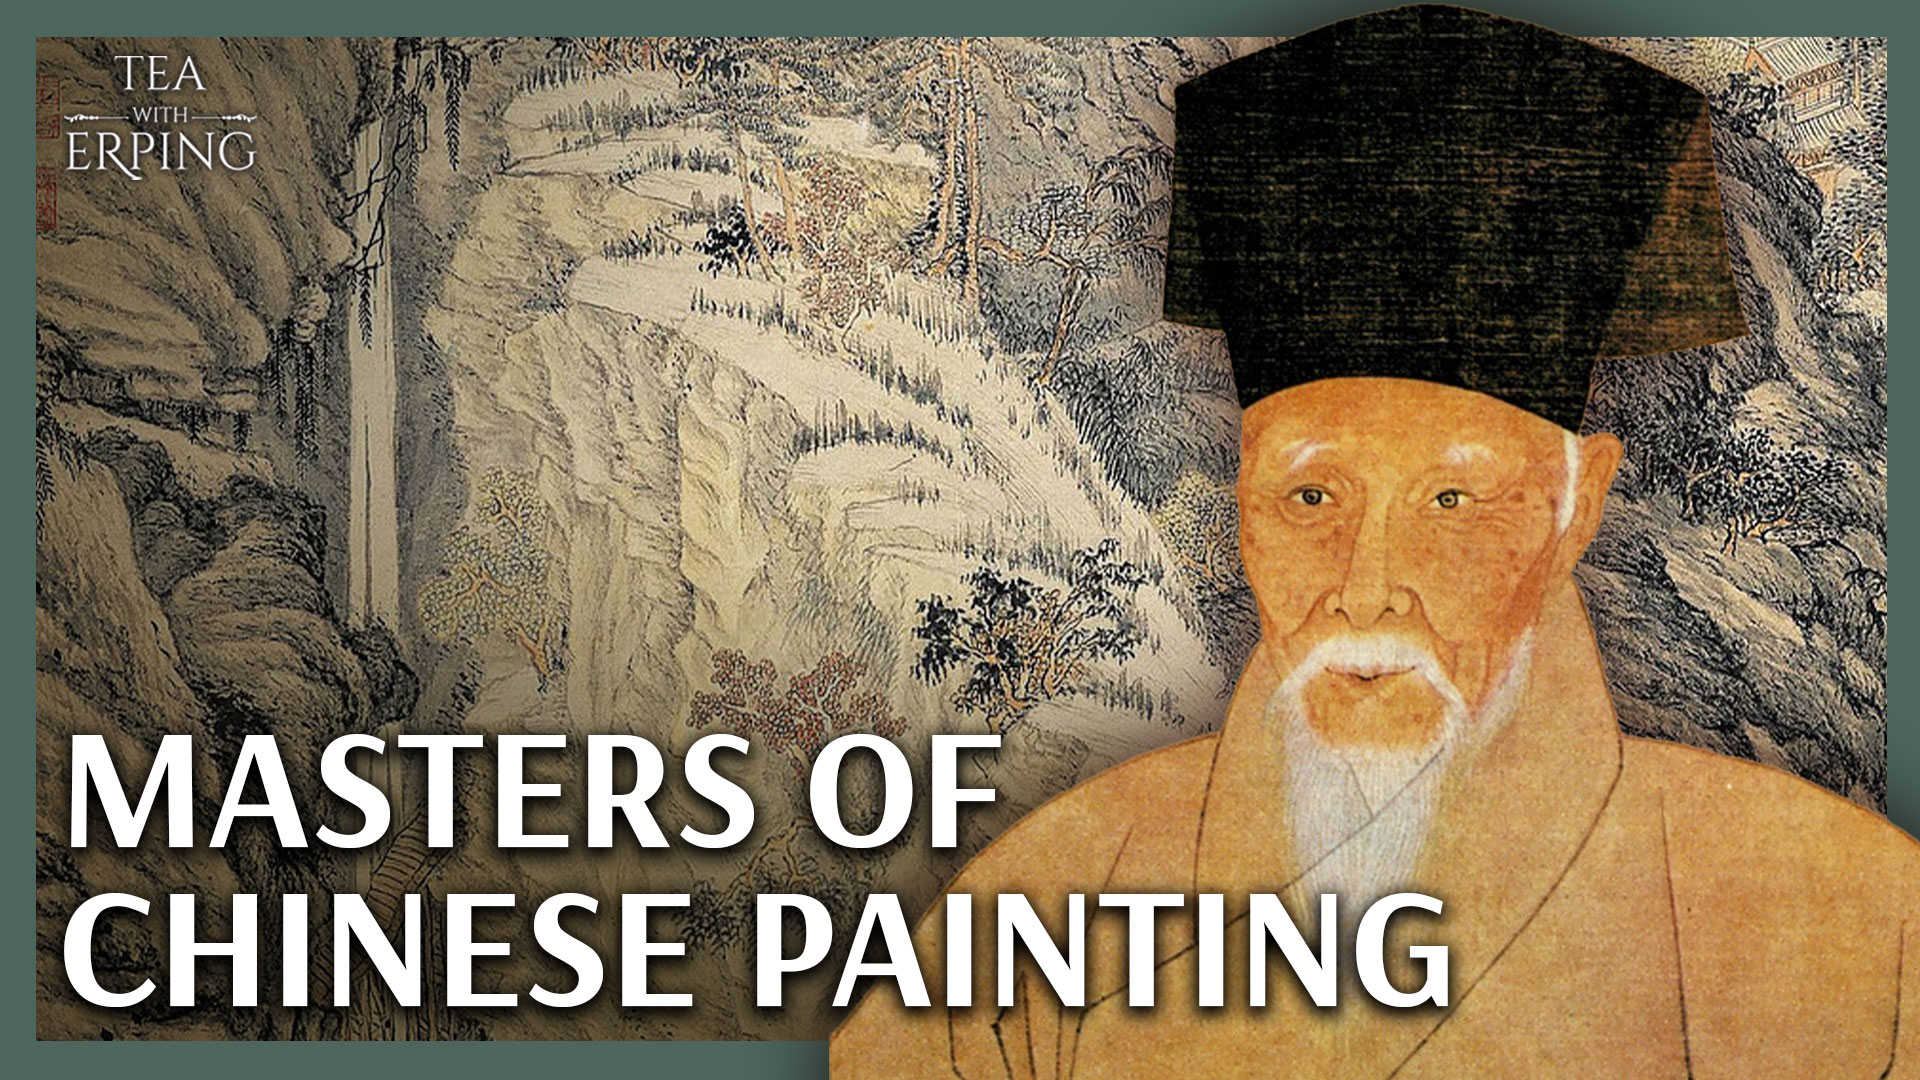 3 Artists You Should Know From China’s Yuan and Ming Dynasties (Pt. 2)| Tea With Erping